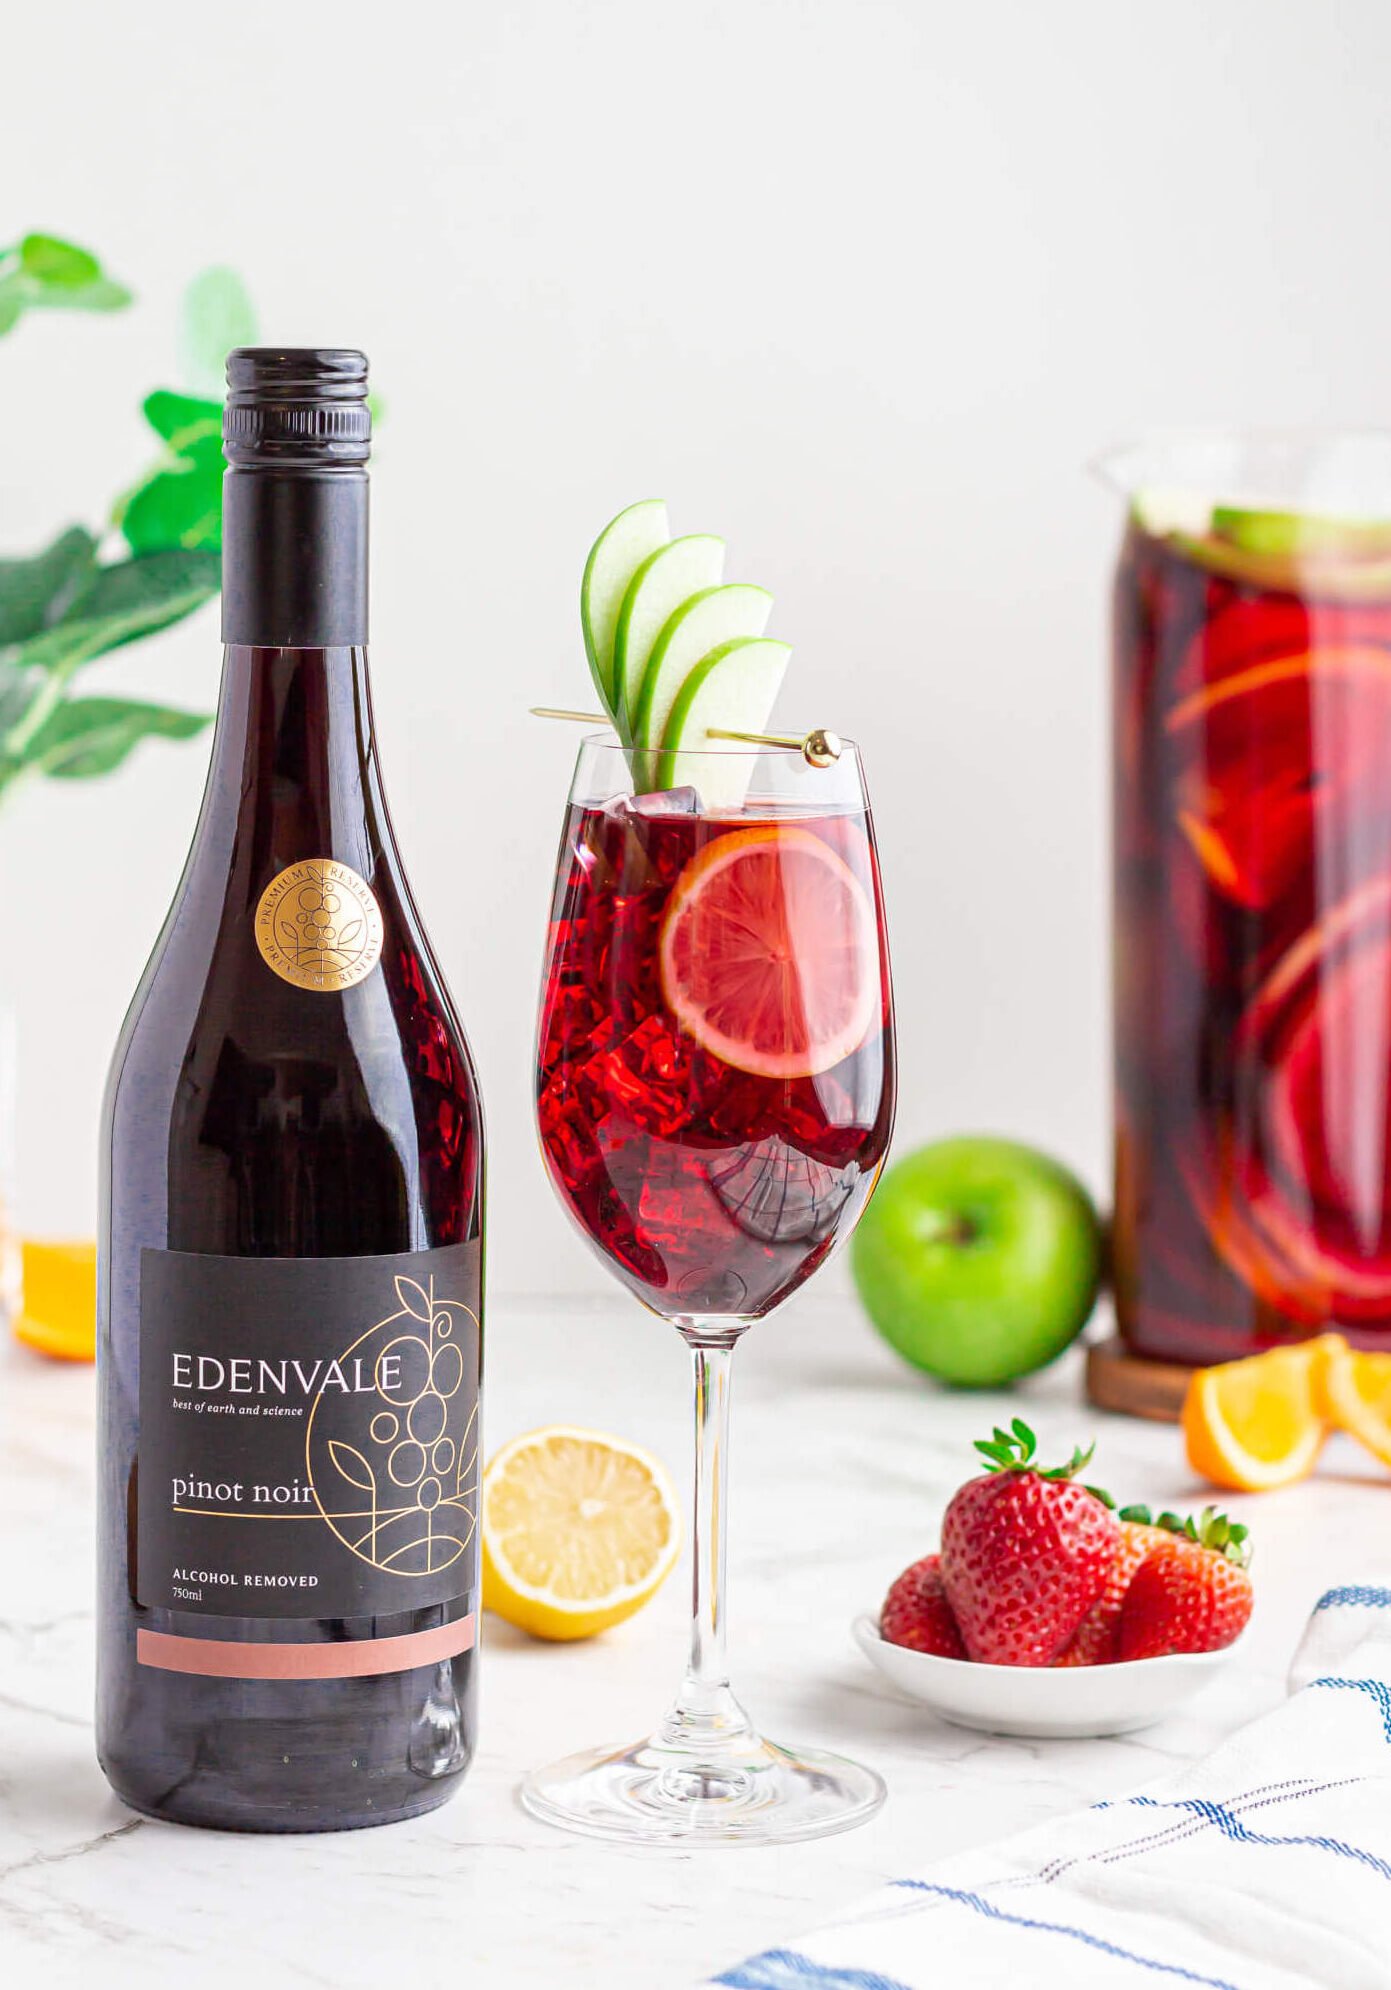 non alcoholic sangria mocktail in a wine glass garnished with an apple fan and lemon round with a jug of Sangria and a bottle of Edenvale pinot noir